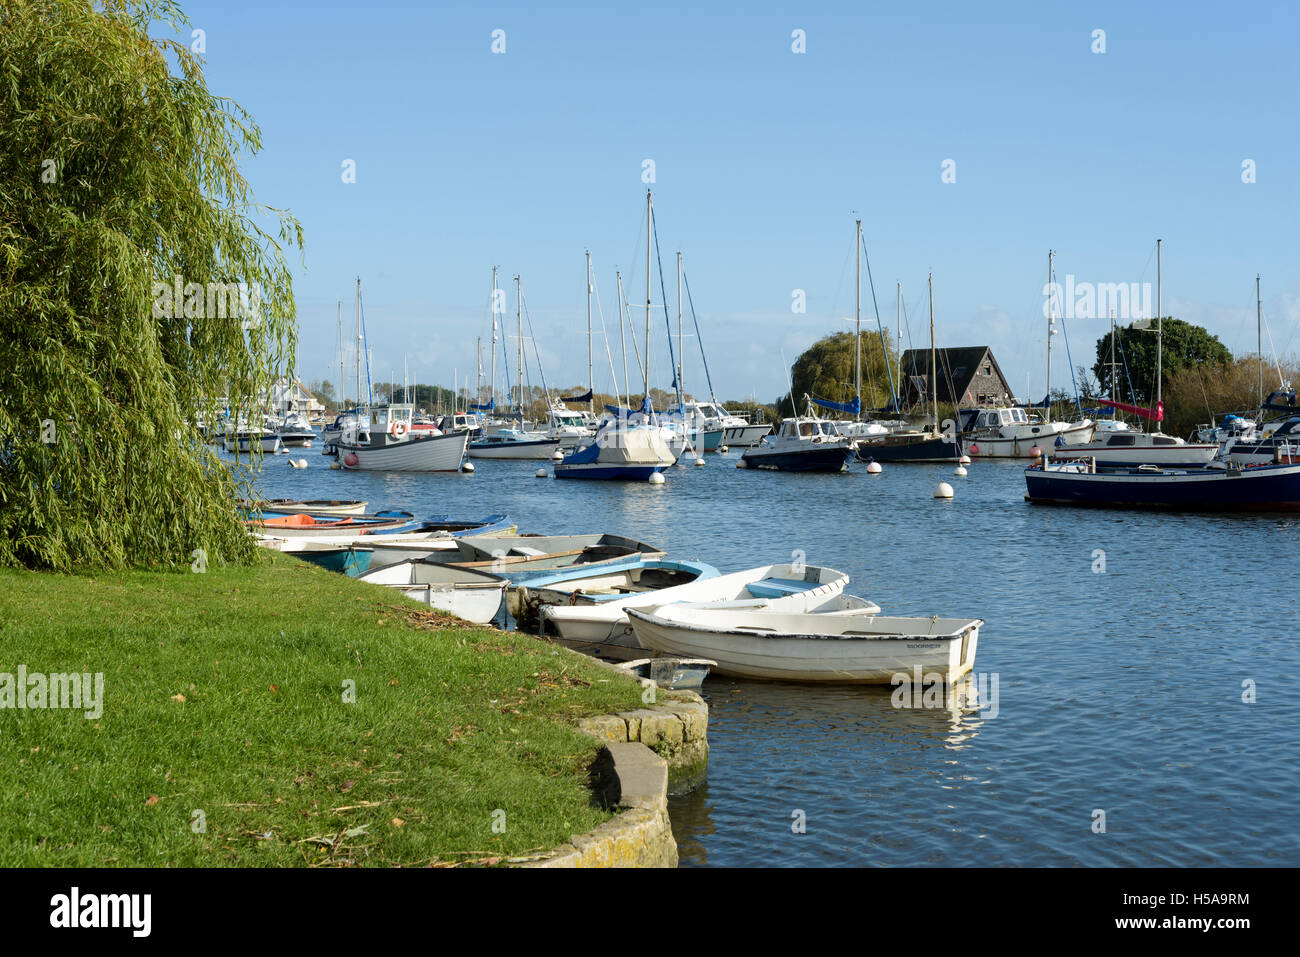 Boats moored on the River Stour, Christchurch, Dorset, England, UK Stock Photo